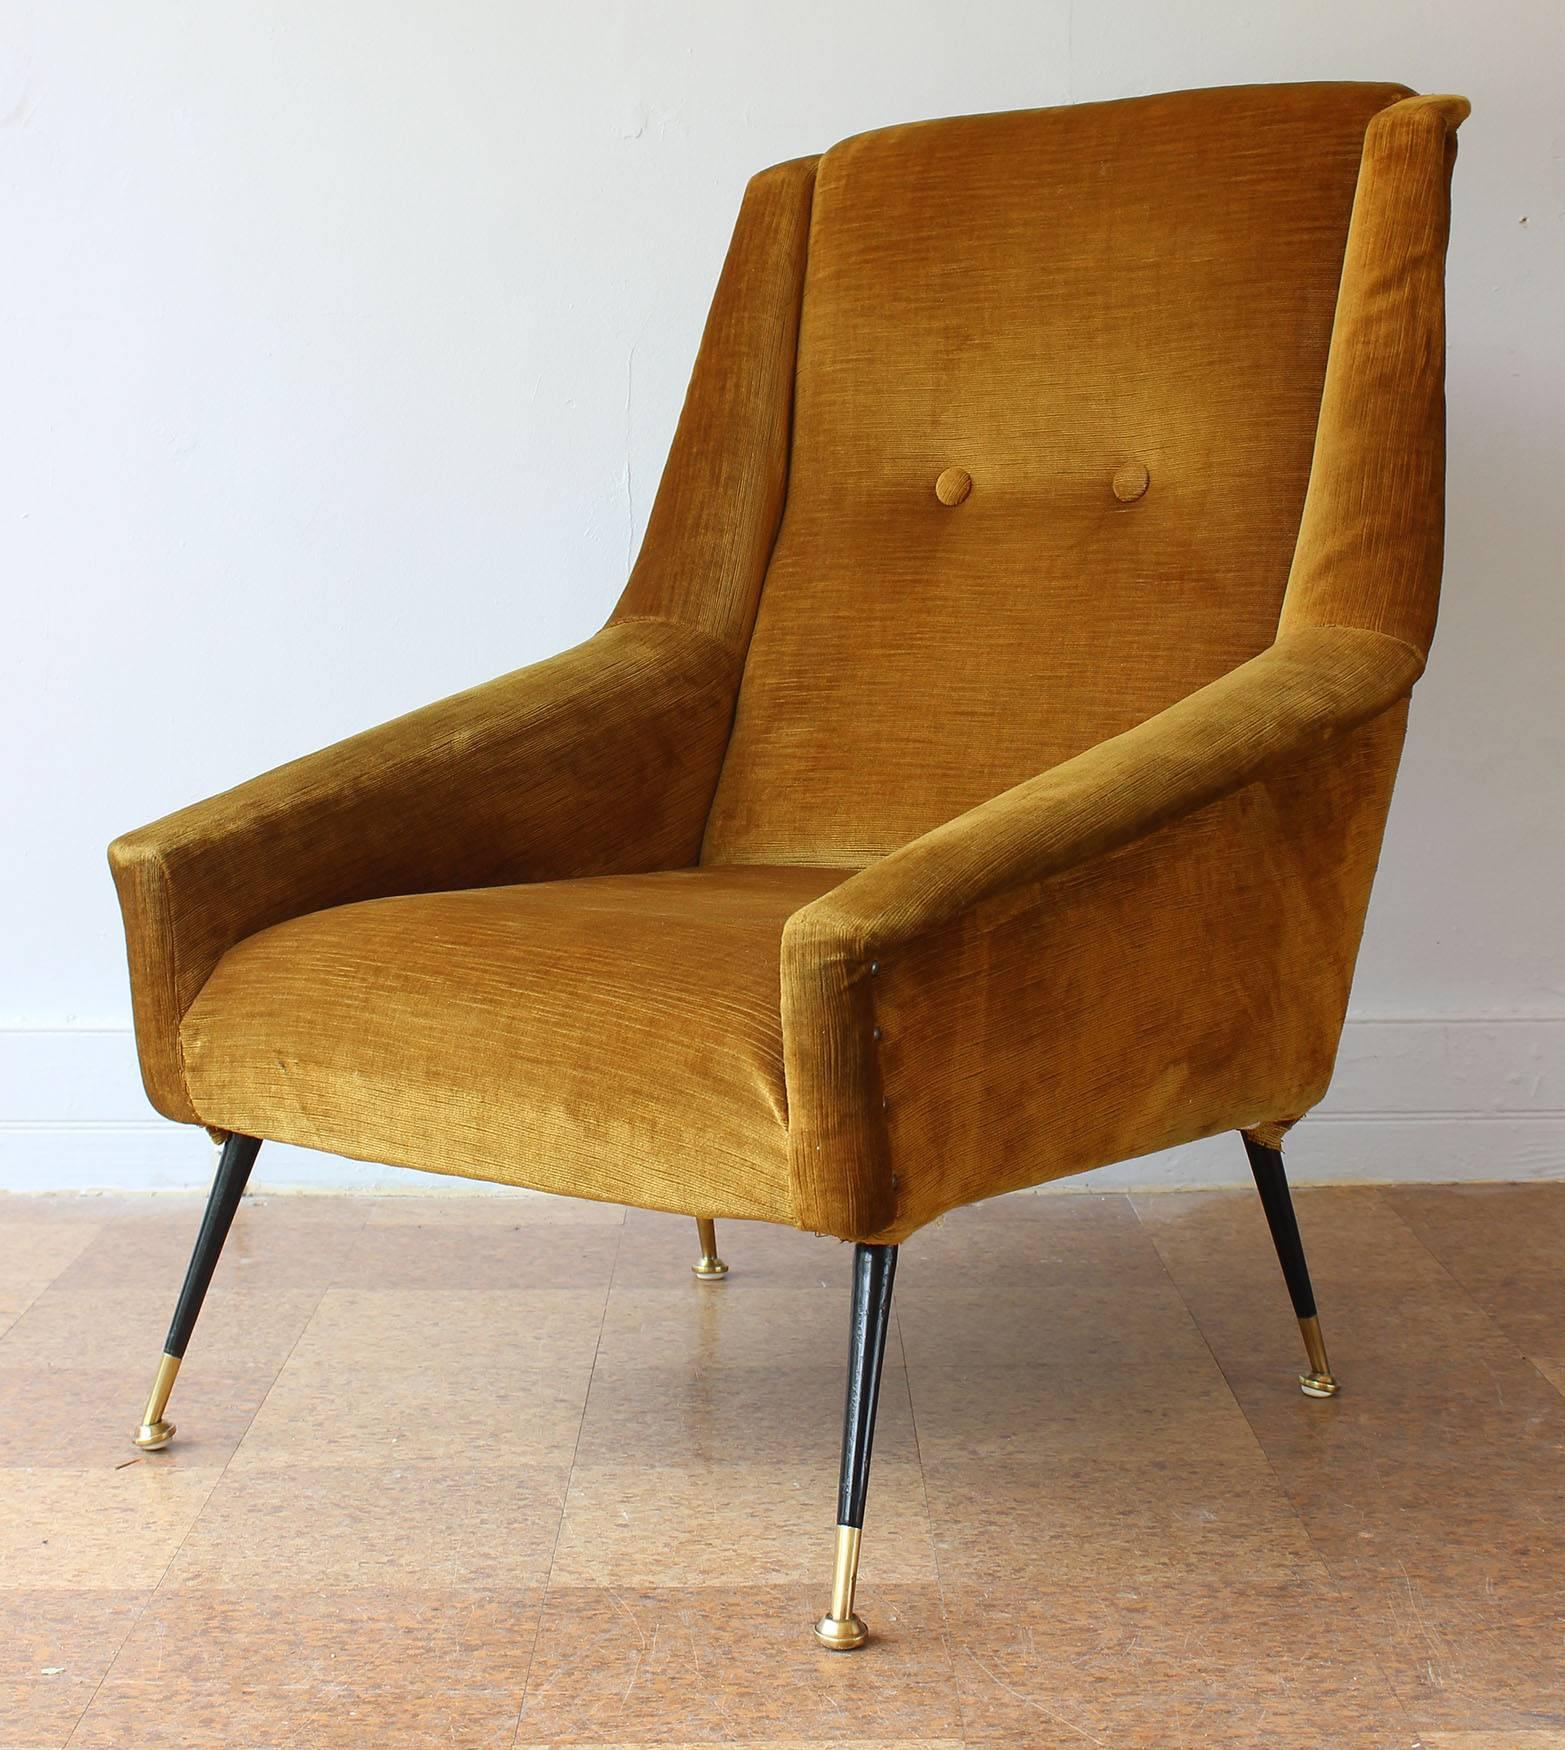 A pair of Italian Mid-Century armchairs in vintage original upholstery with tapered, enameled metal legs with brass feet.